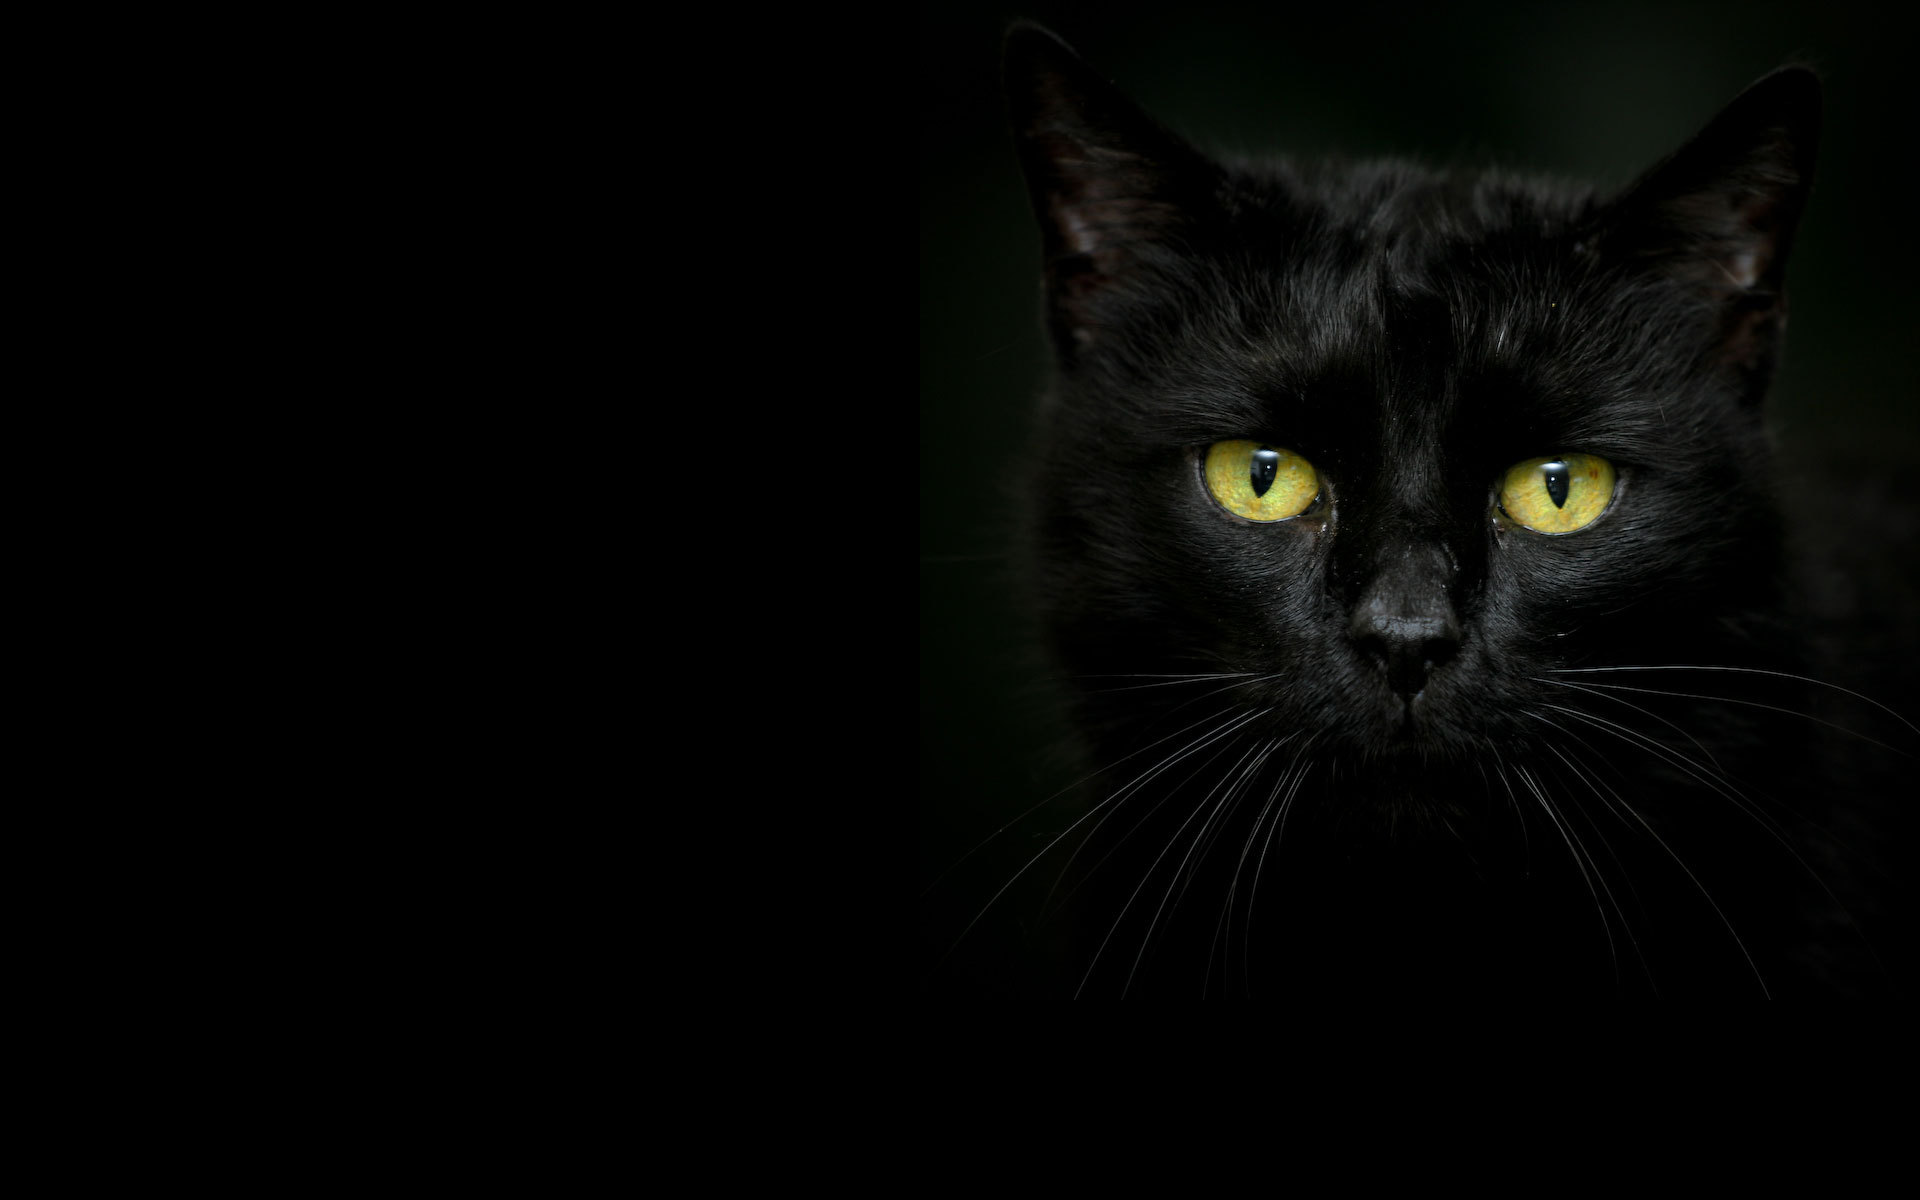 Beautiful black cat on a dark background wallpapers and images - wallpapers, pictures, photos